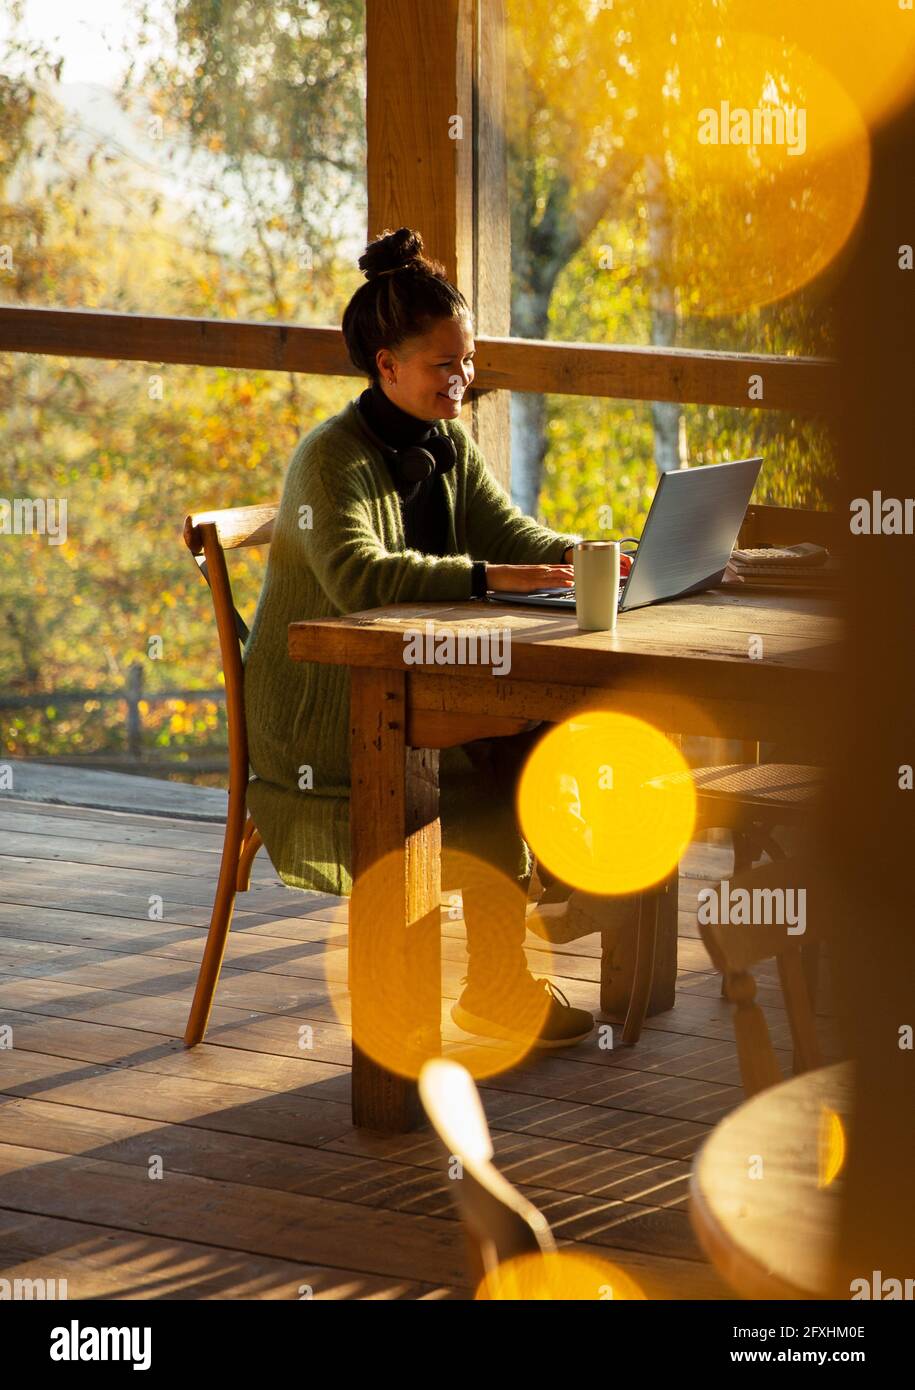 Small business owner working at laptop in sunny autumn cafe Stock Photo